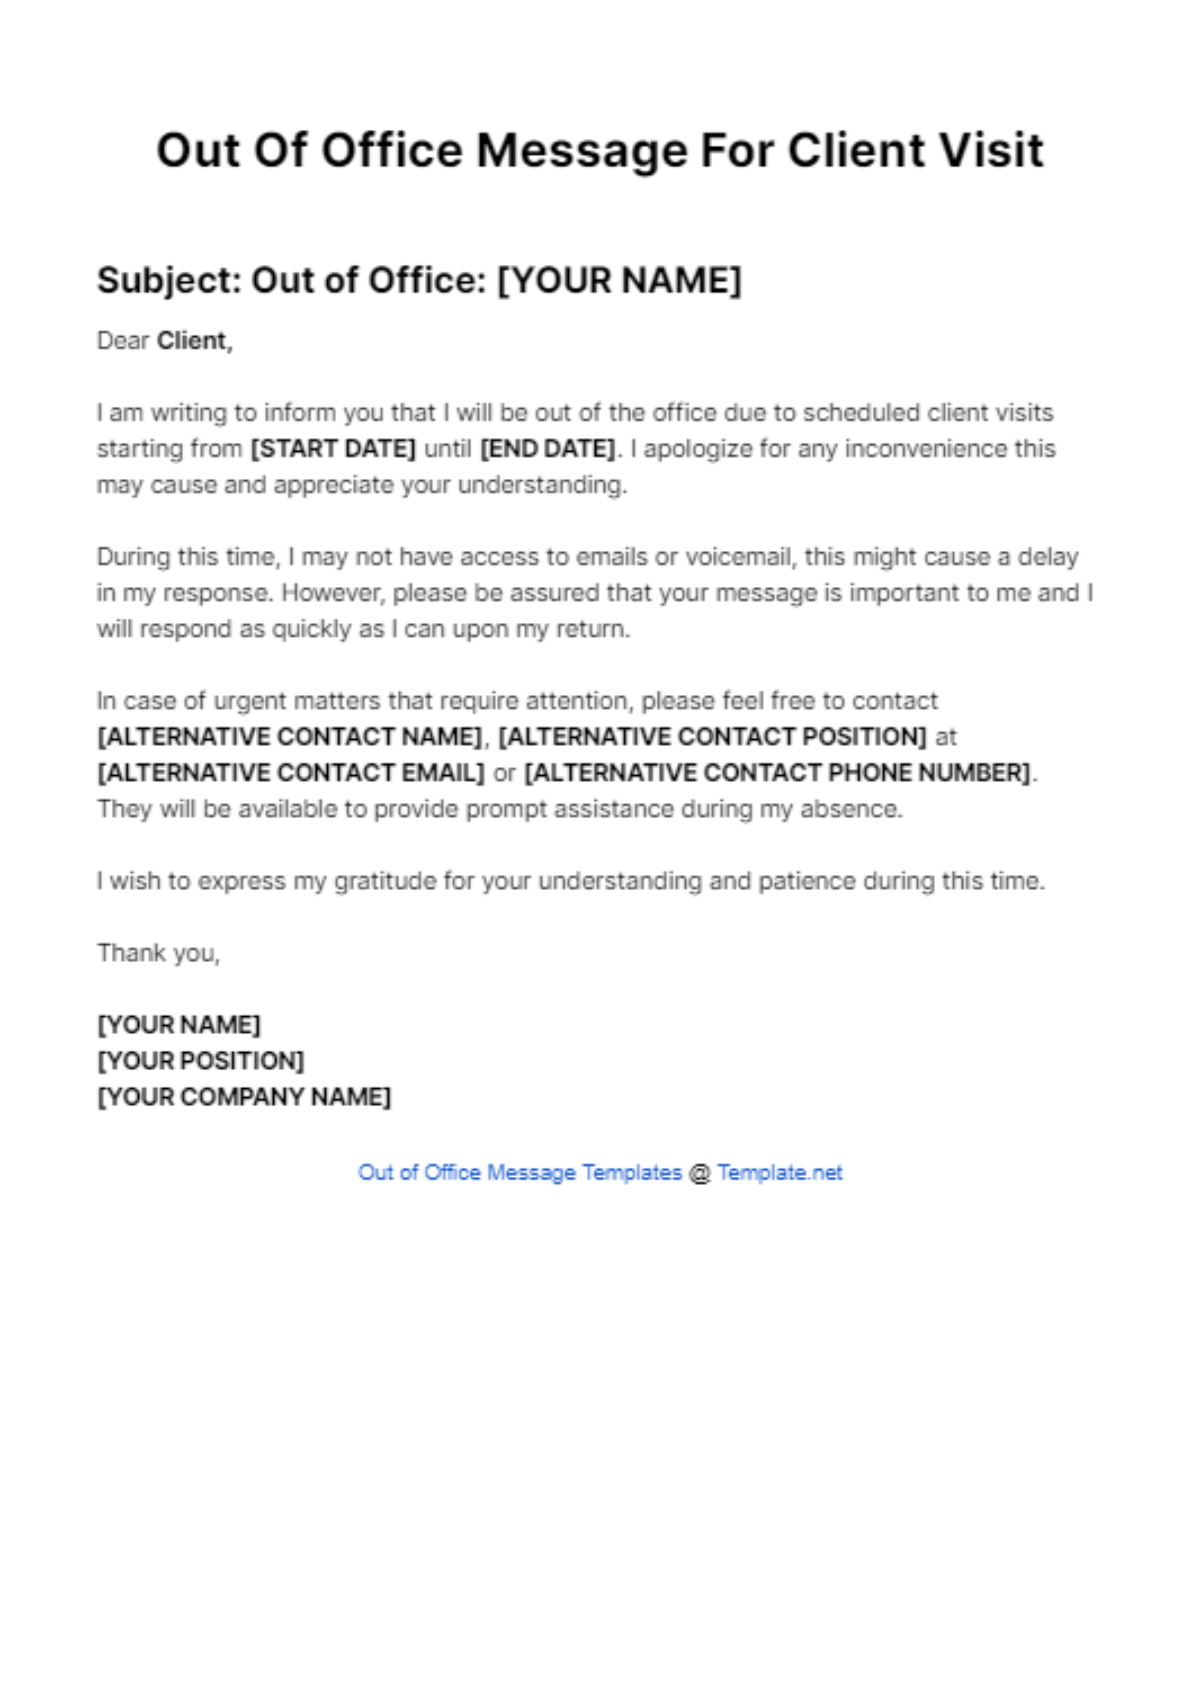 Free Out Of Office Message For Client Visit Template